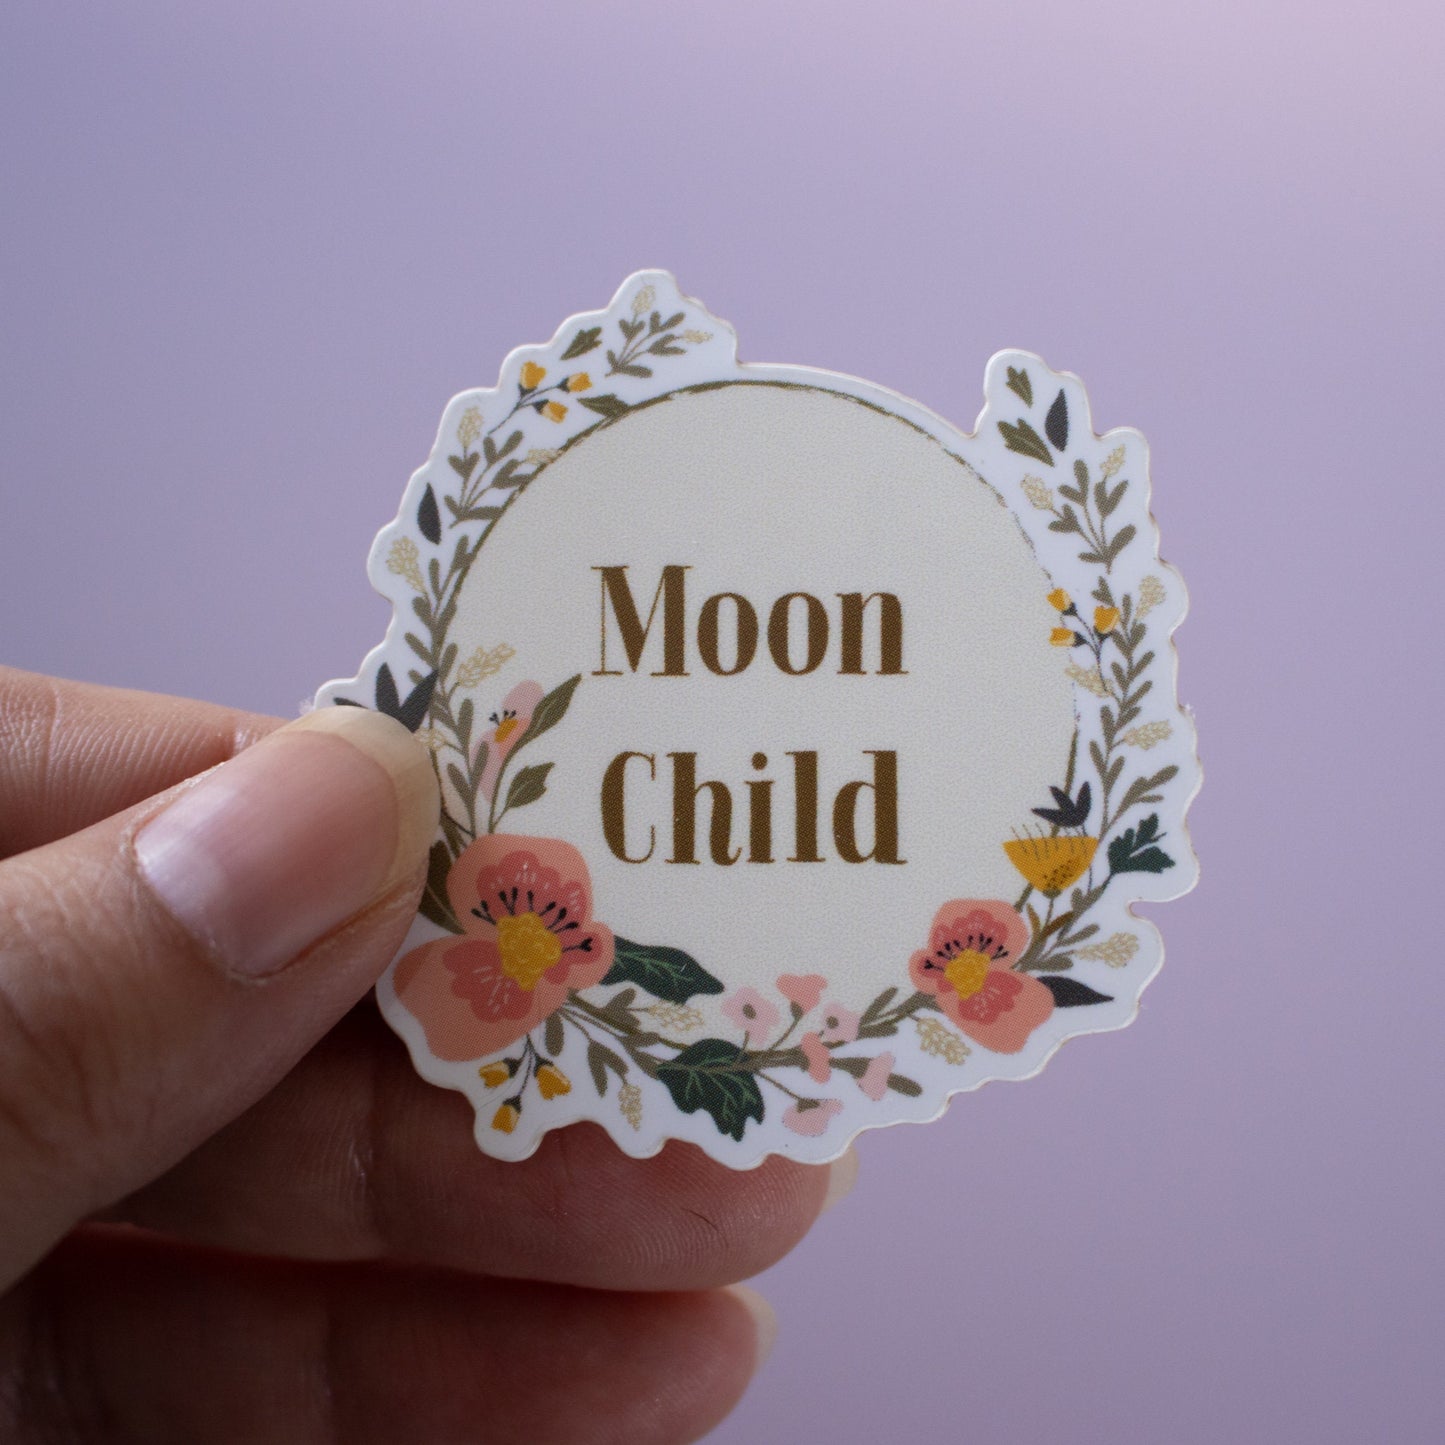 Moon Child Floral Wreath Sticker/Witchy Sticker/Moon Witch Sticker/Lunar Love Sticker